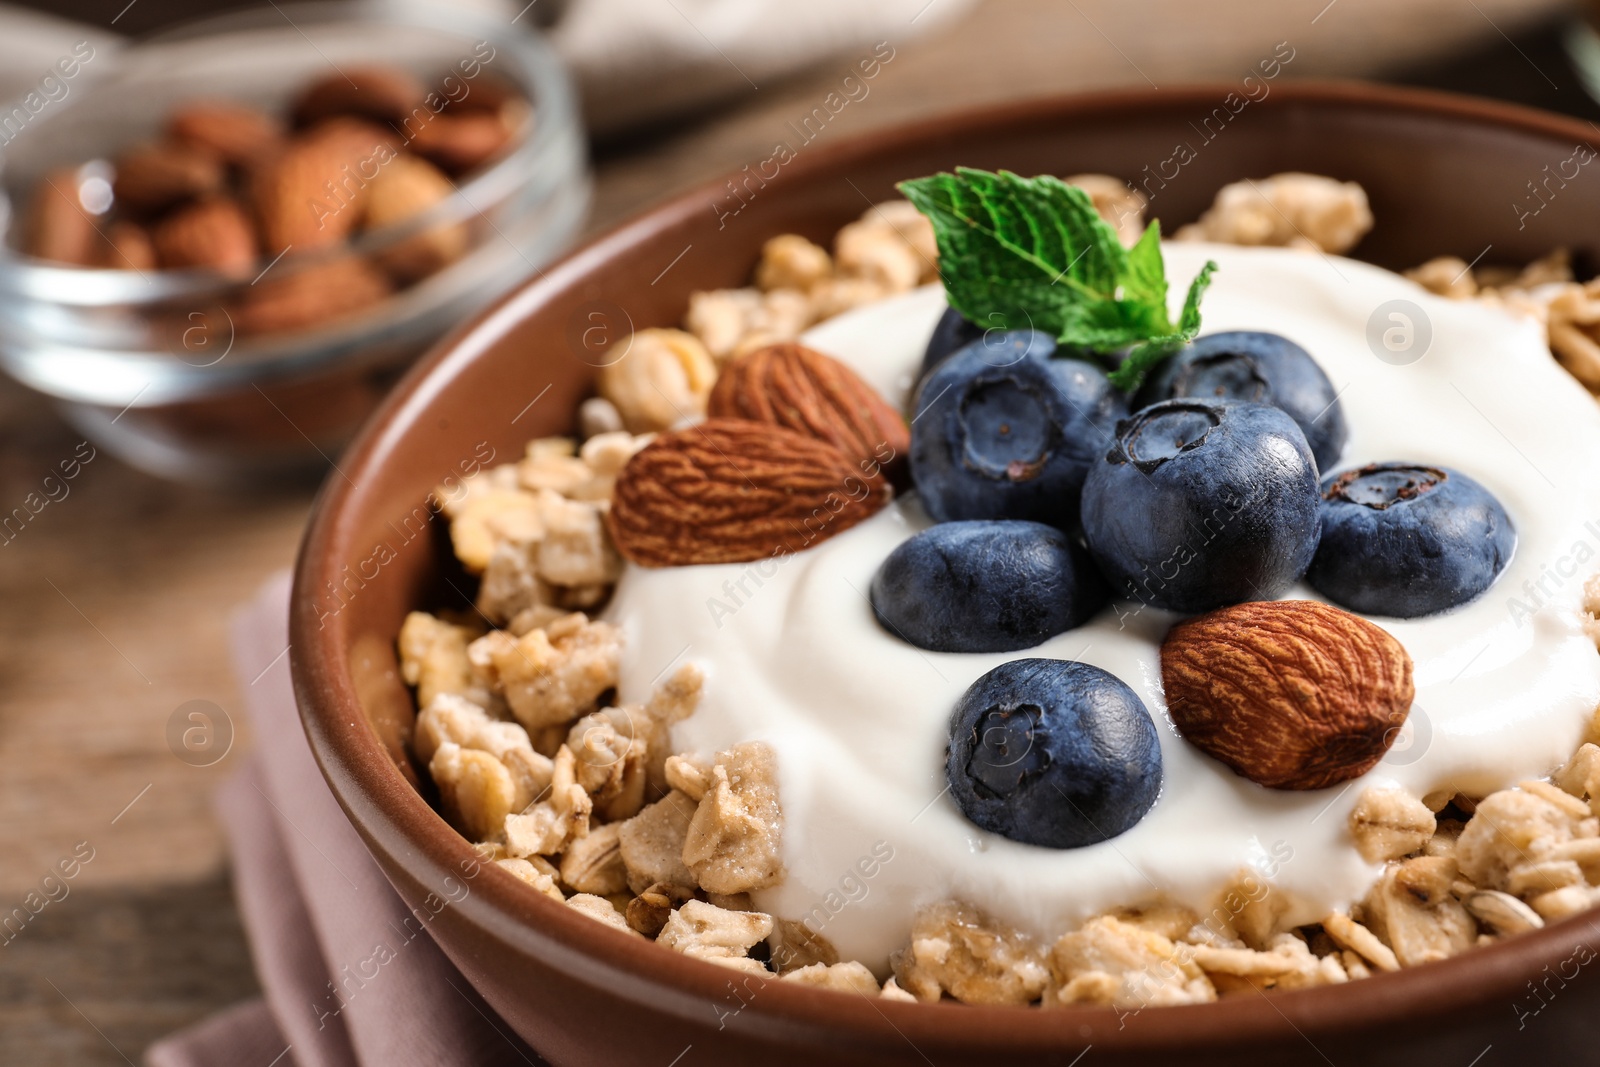 Photo of Bowl of tasty oatmeal with blueberries and yogurt on table, closeup